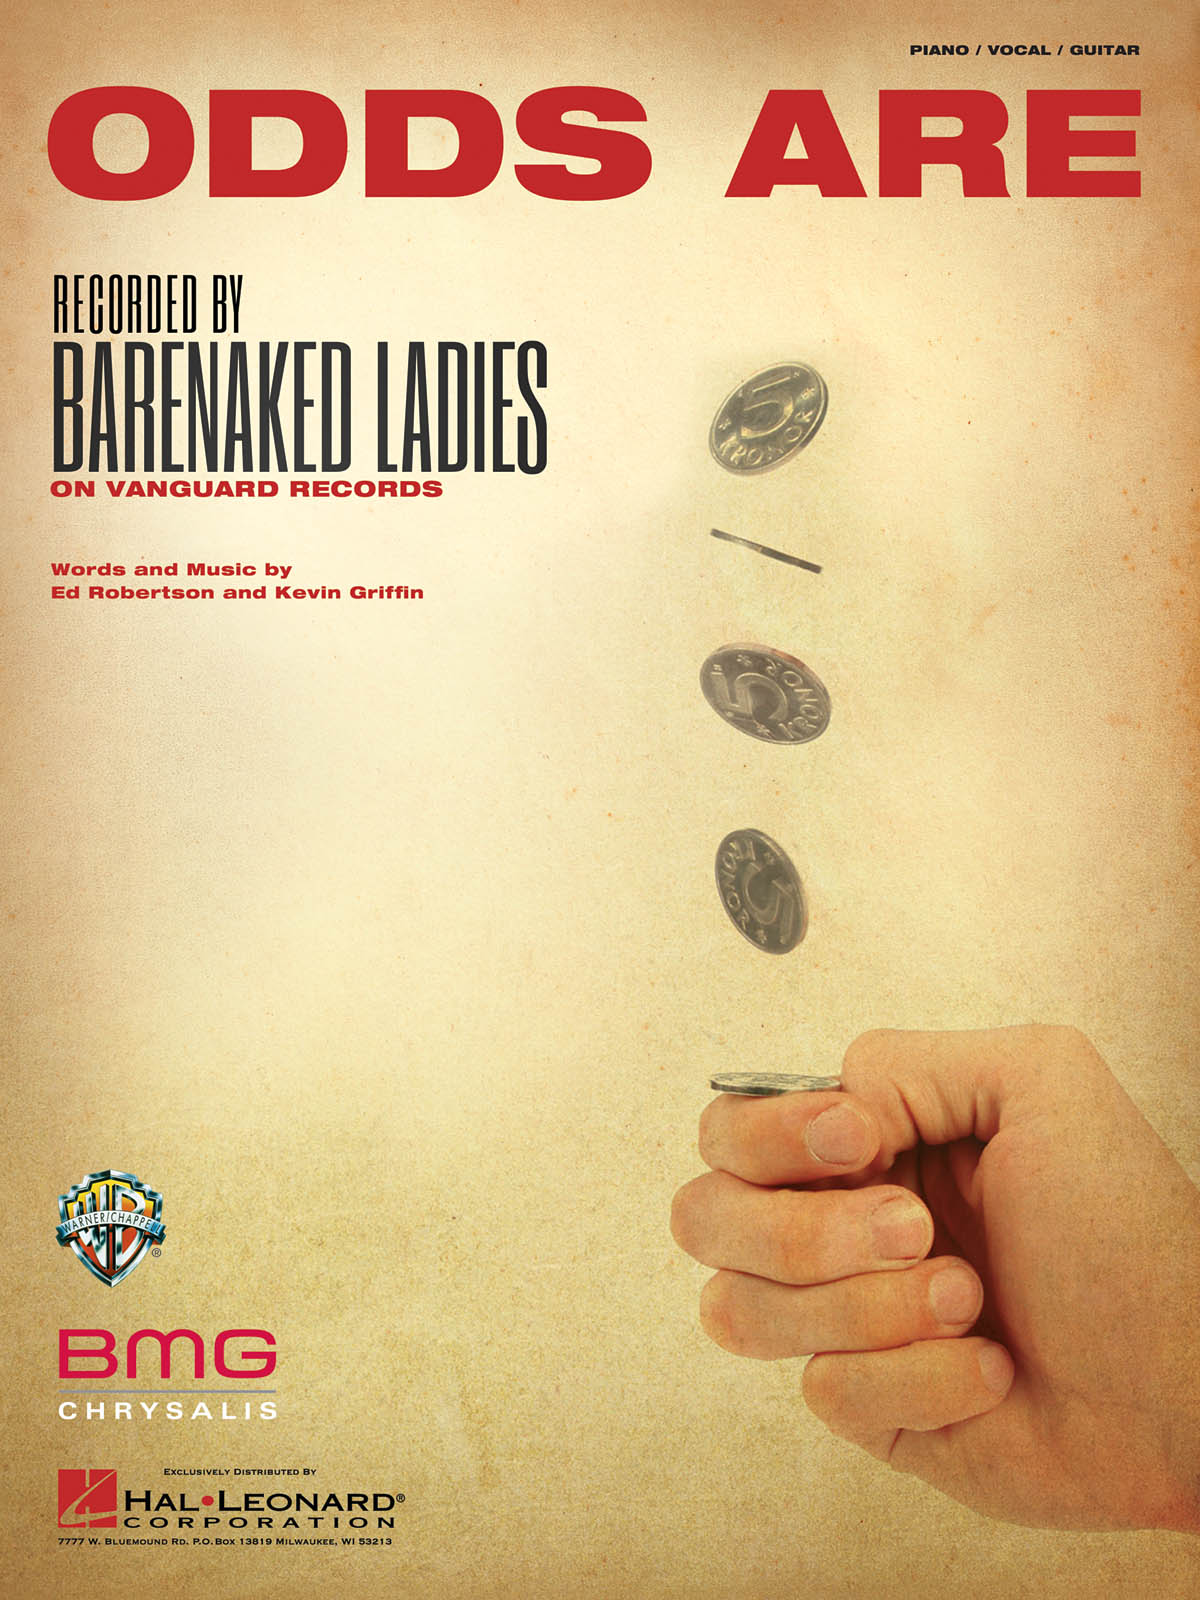 Barenaked Ladies: Odds Are: Piano  Vocal and Guitar: Single Sheet